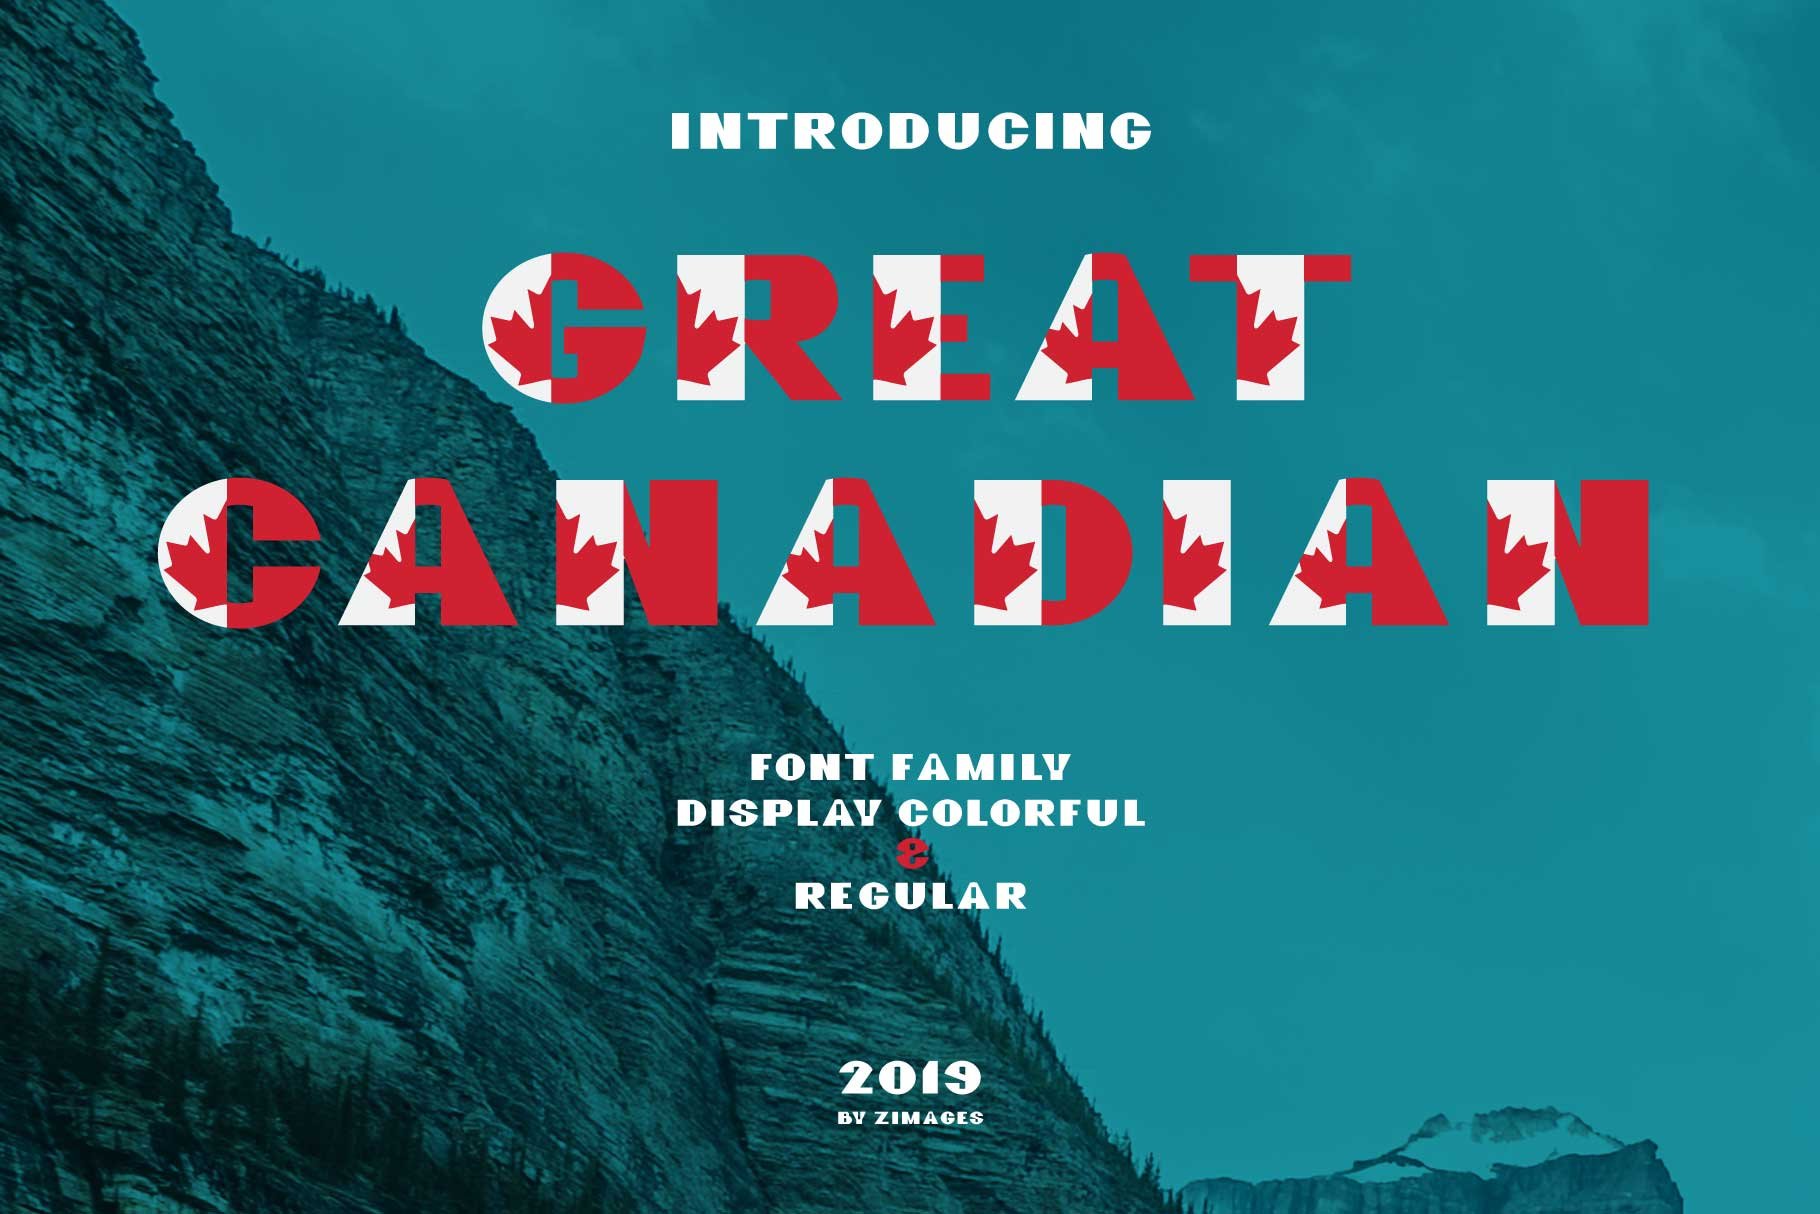 GreatCanadian-font family cover image.